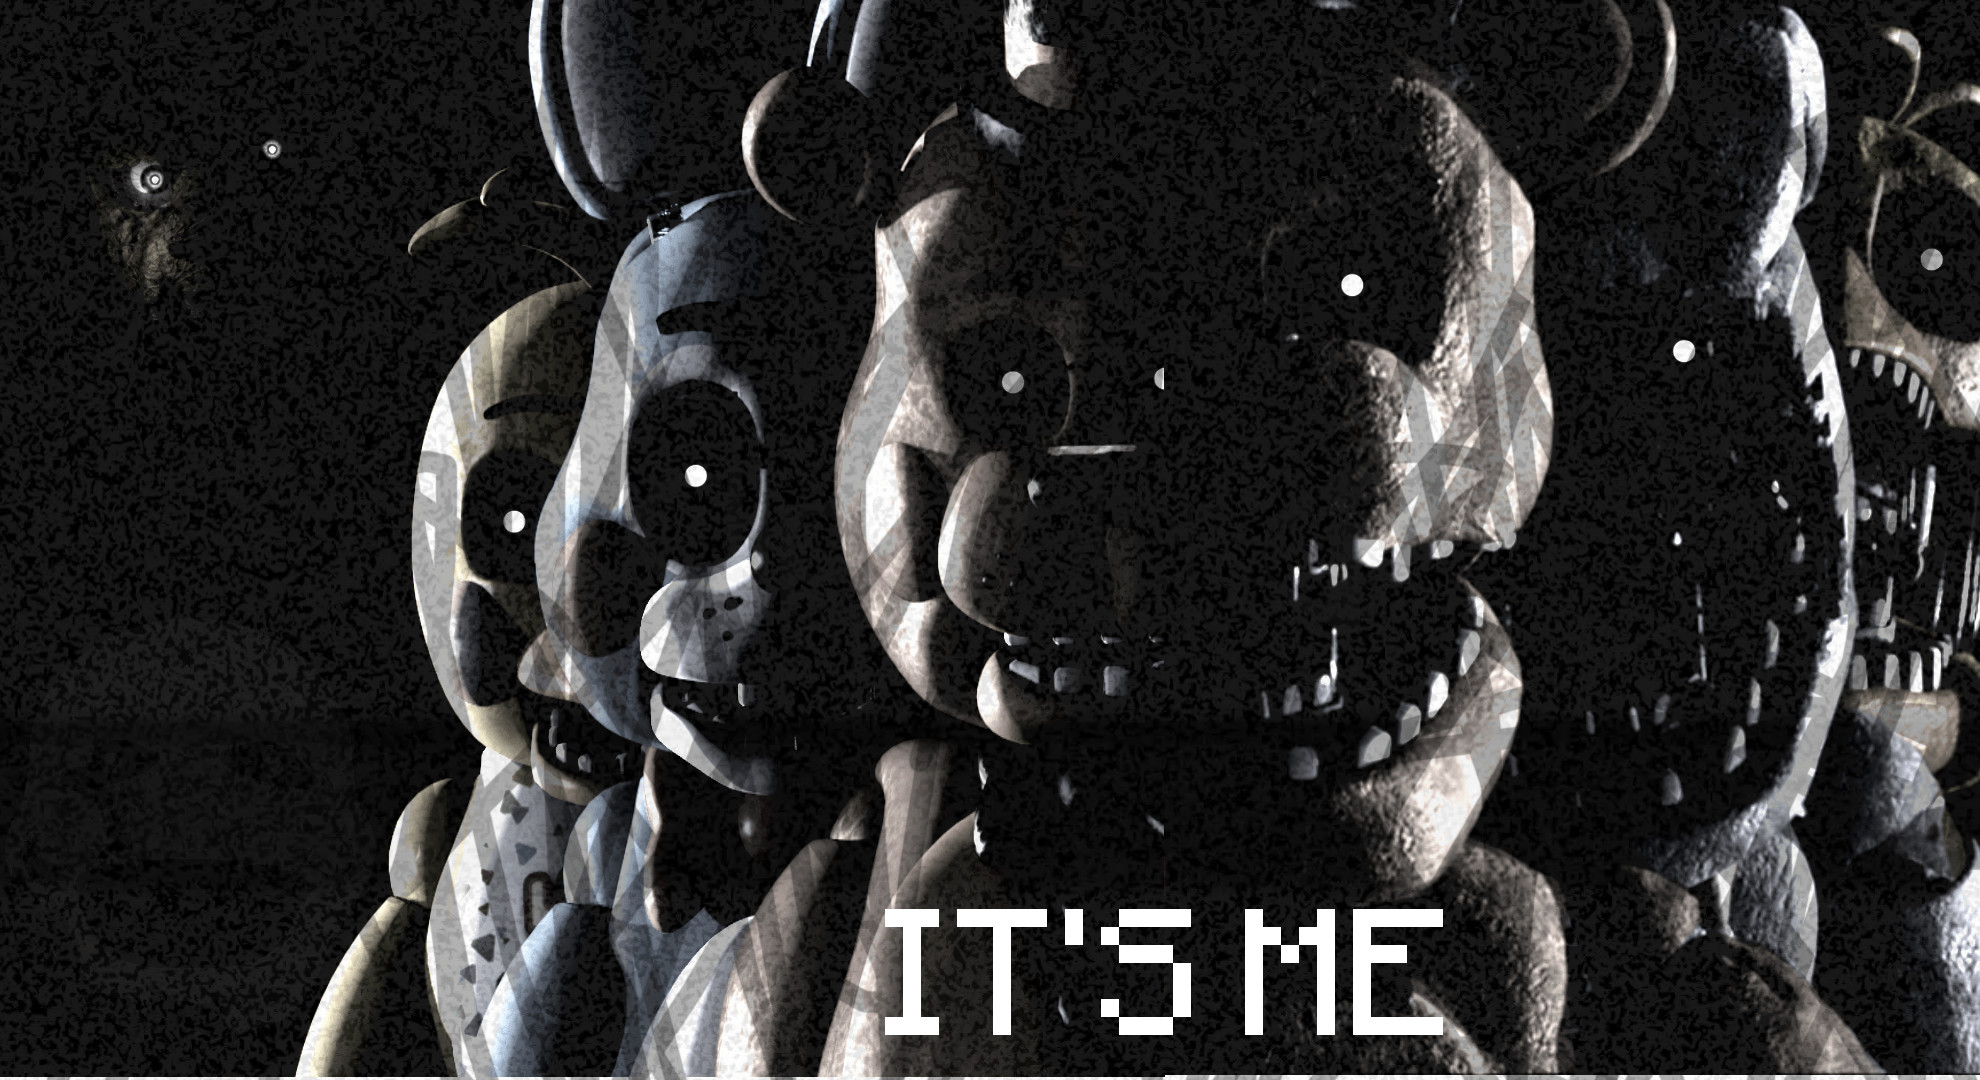 1980x1080 My Own FNAF Wallpaper. (You can download it if you'd like .